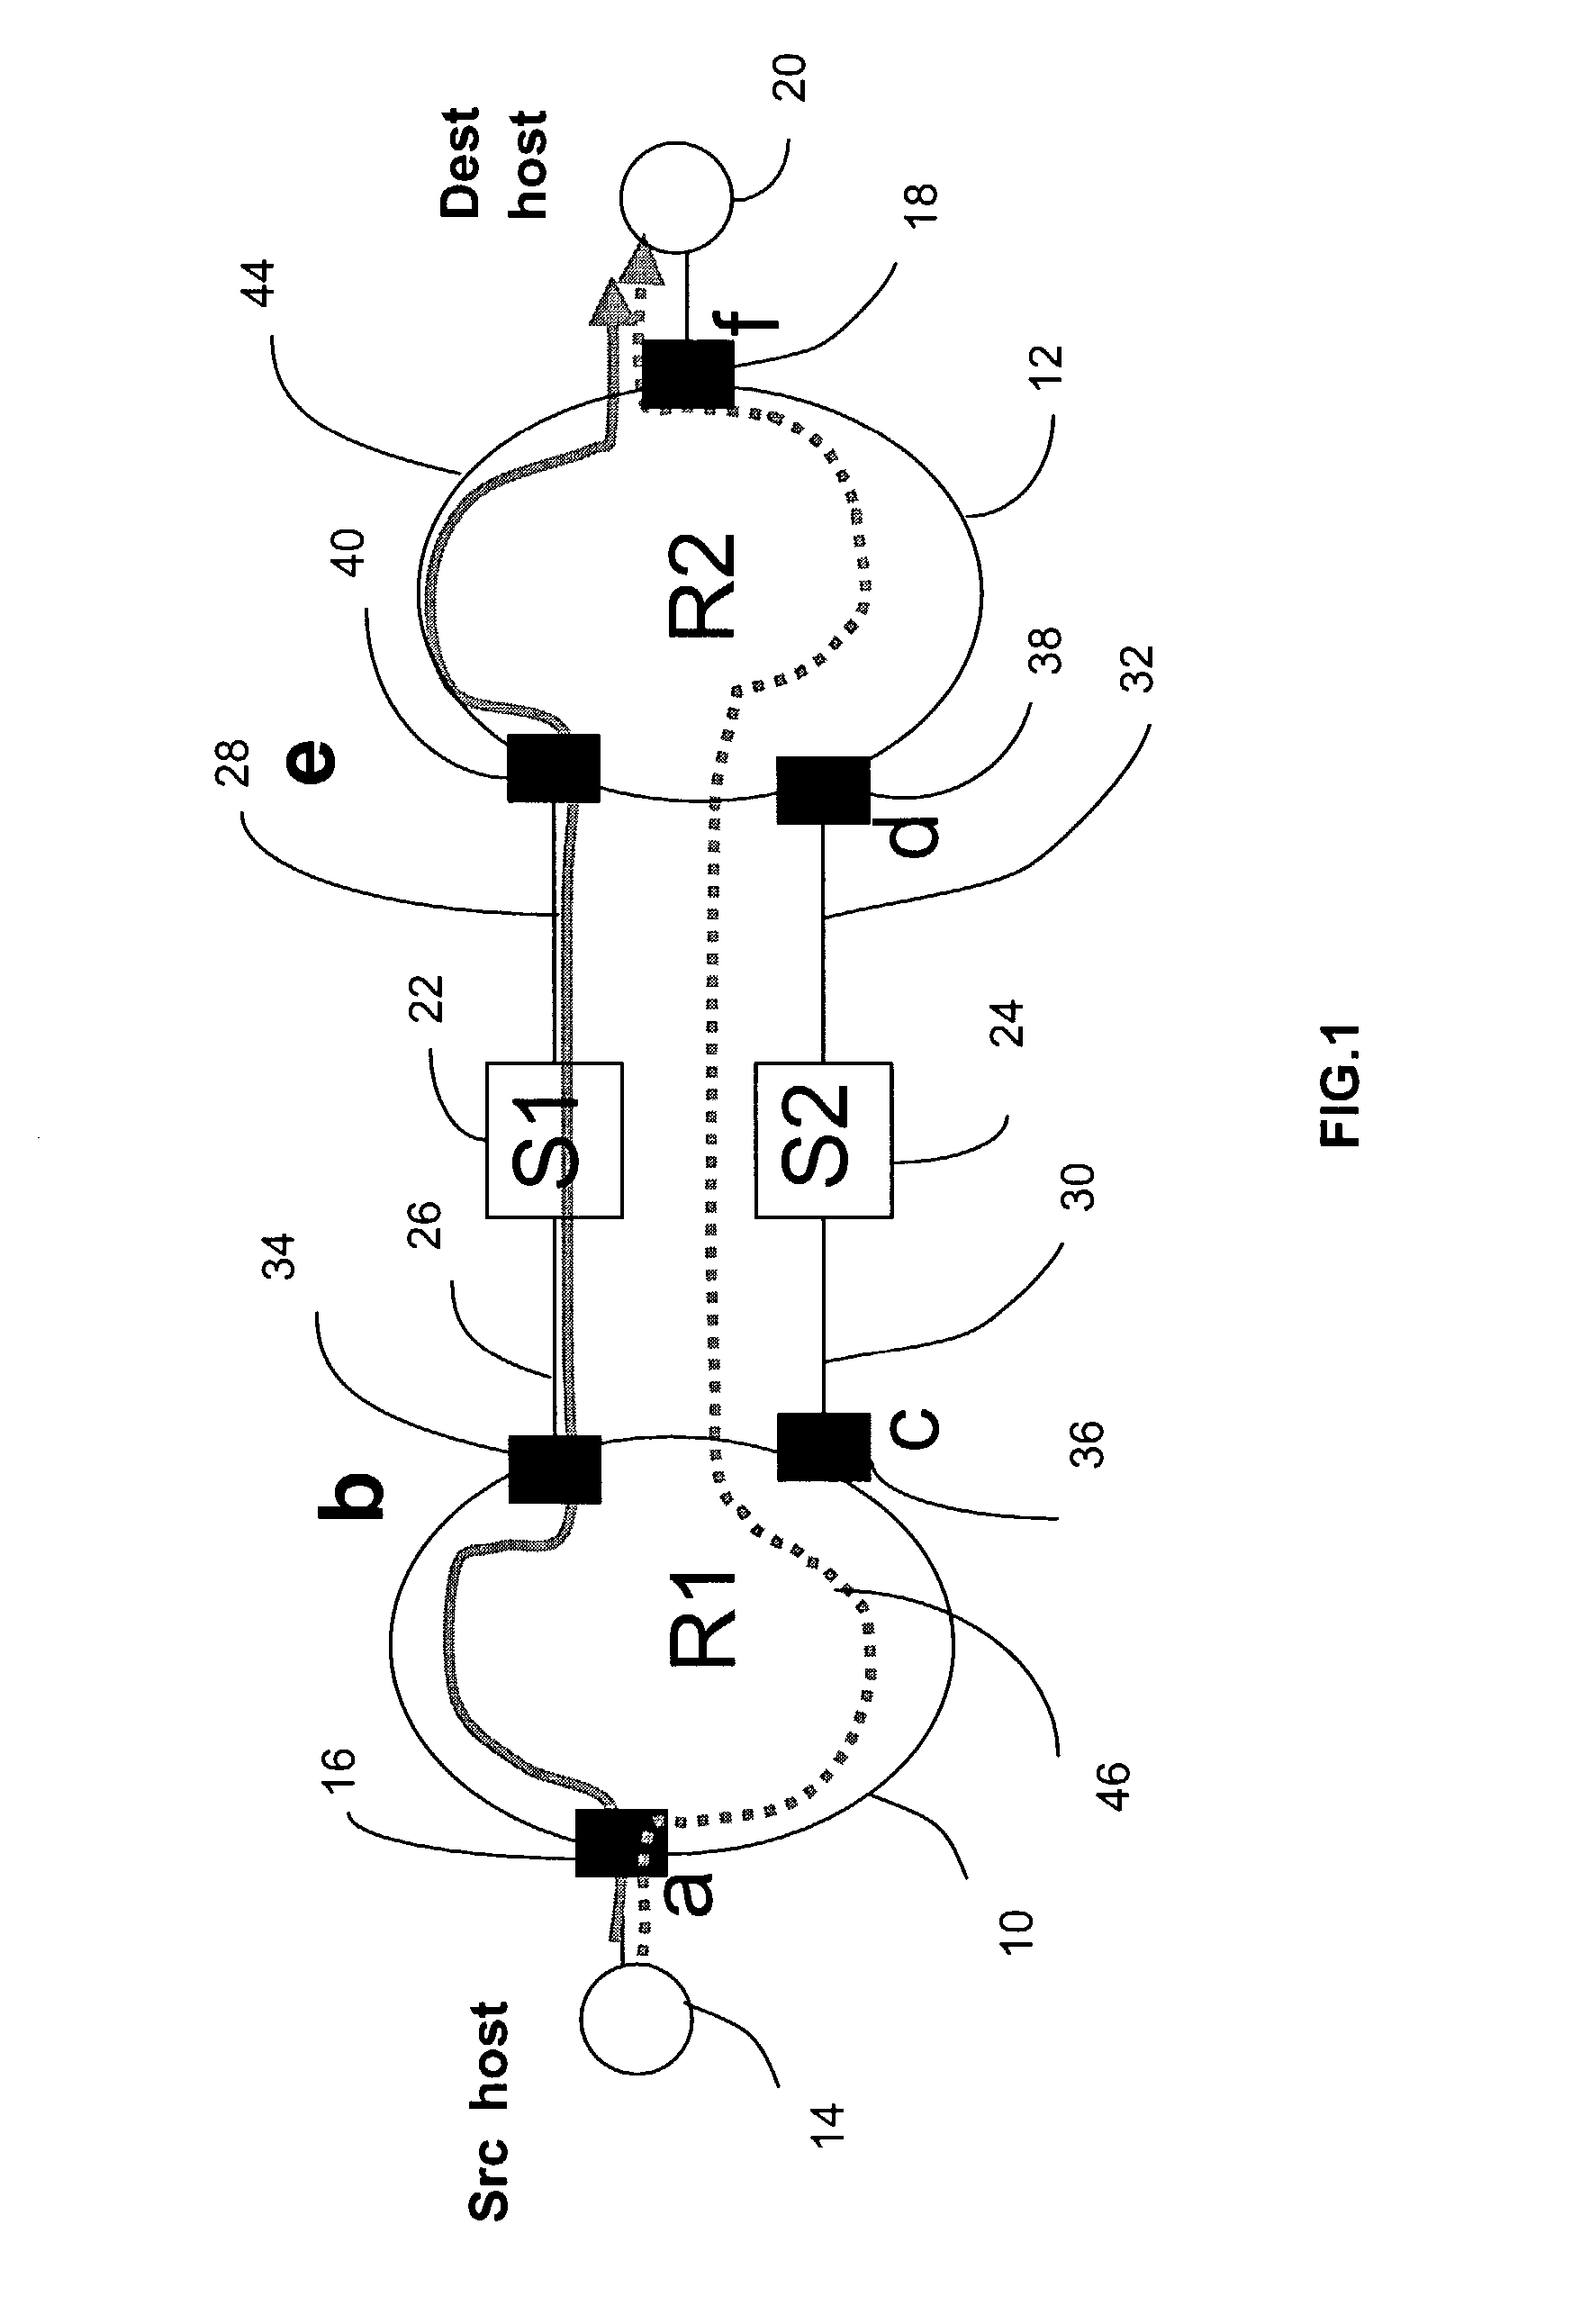 Protection system and method for resilient packet ring (RPR) interconnection